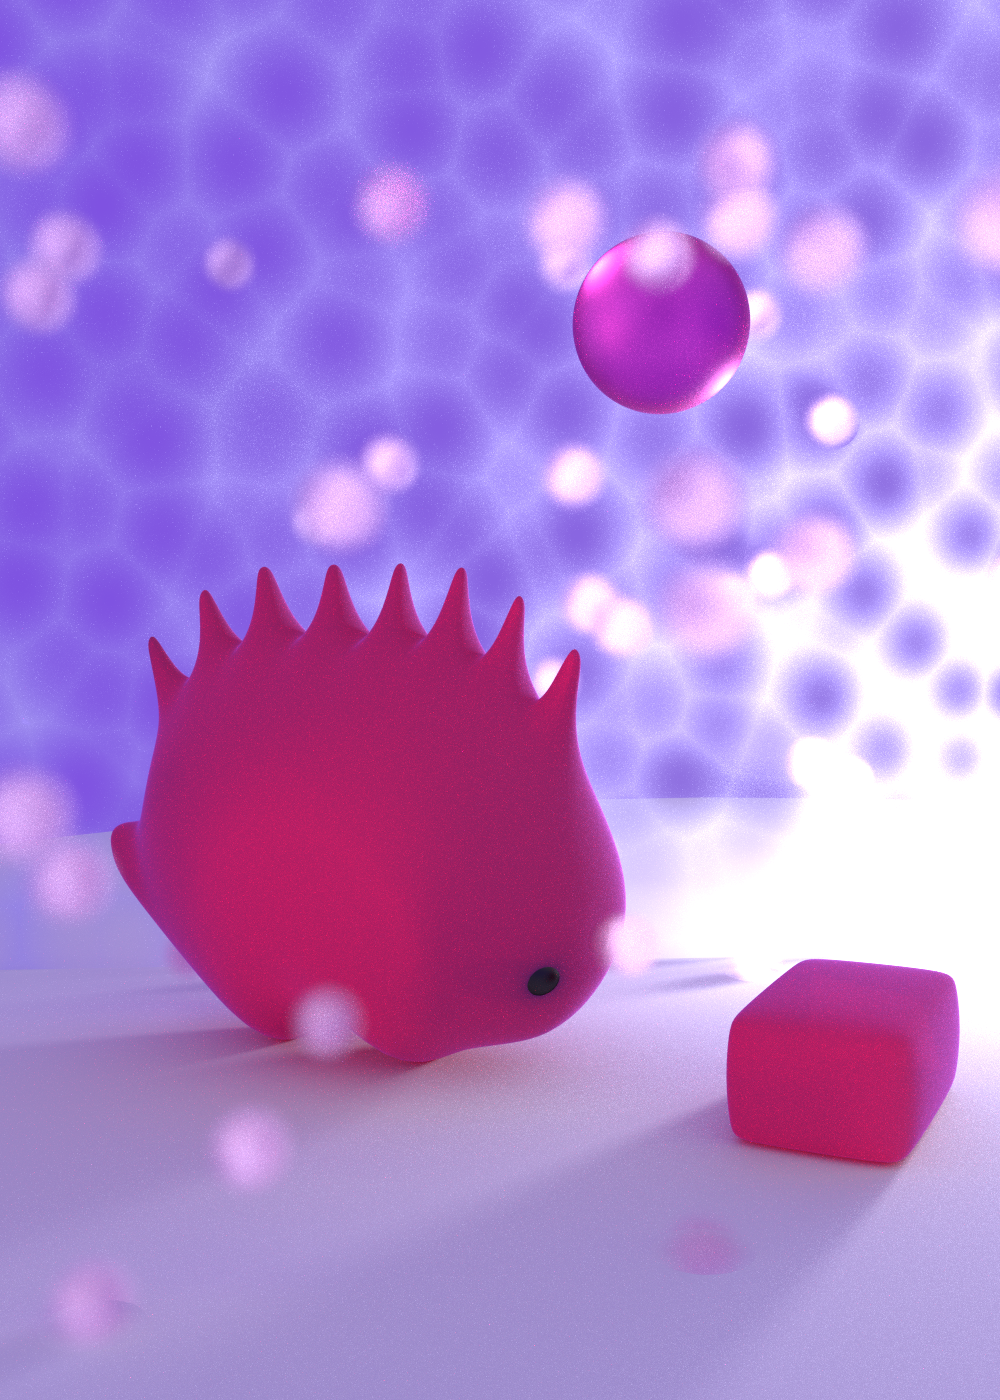 Bubble Gum Dino in 3D! by Microno95 on DeviantArt